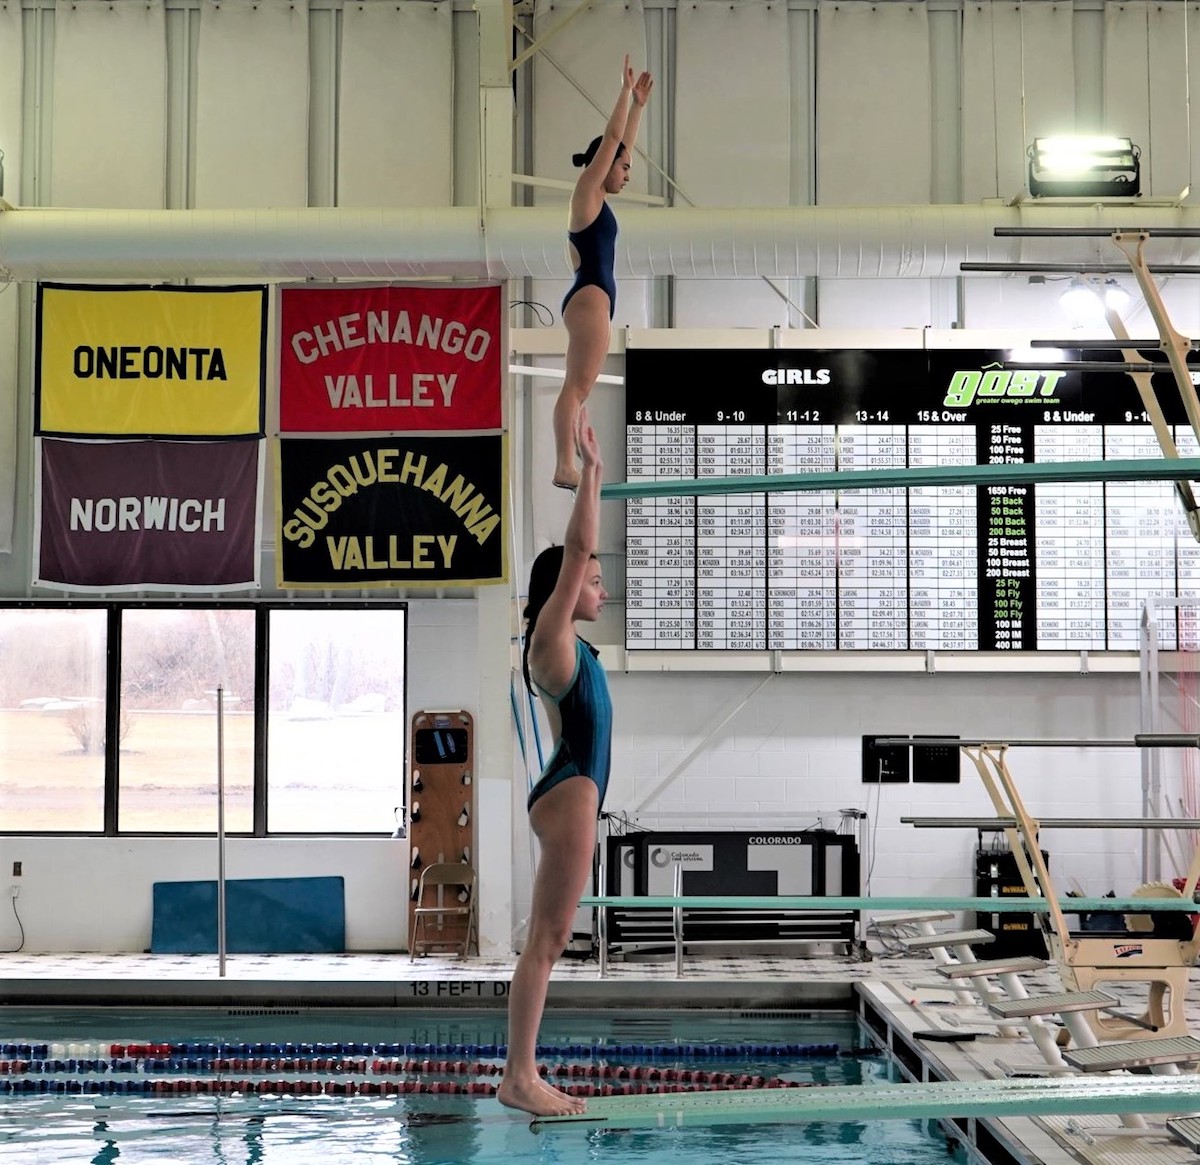 Springboard Diving Clinic taking place in Owego